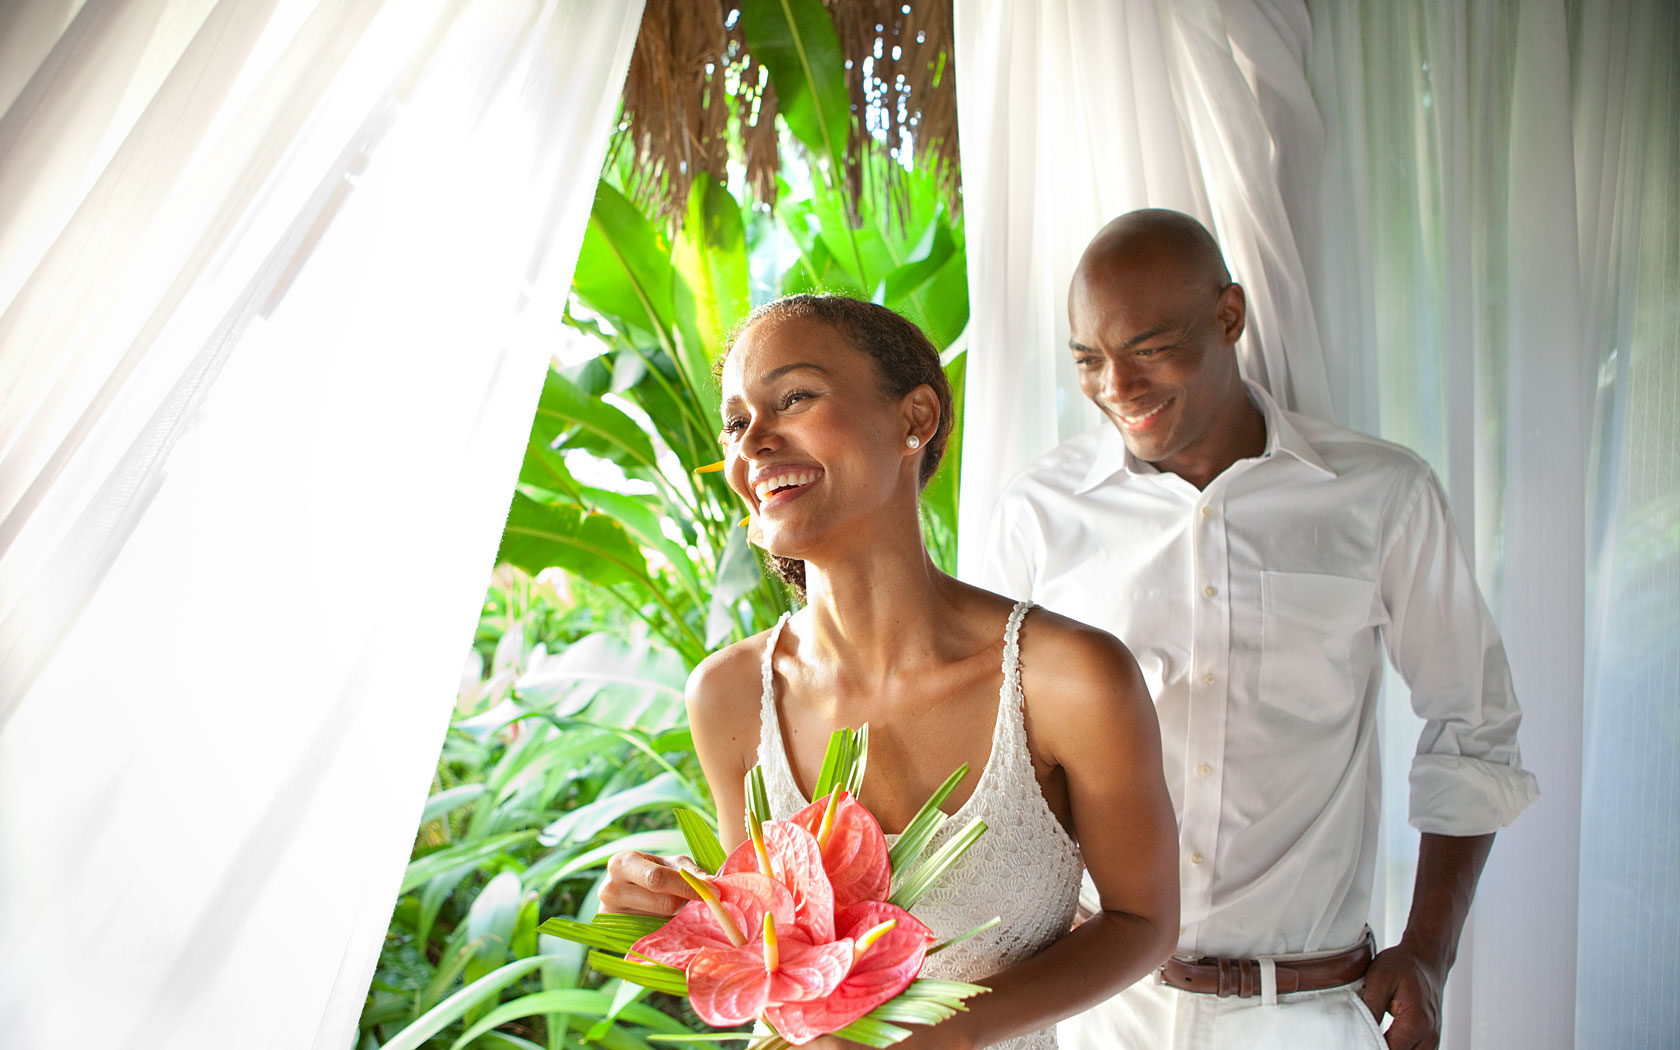 Wedding Options Negril Jamaica All Inclusive Resorts